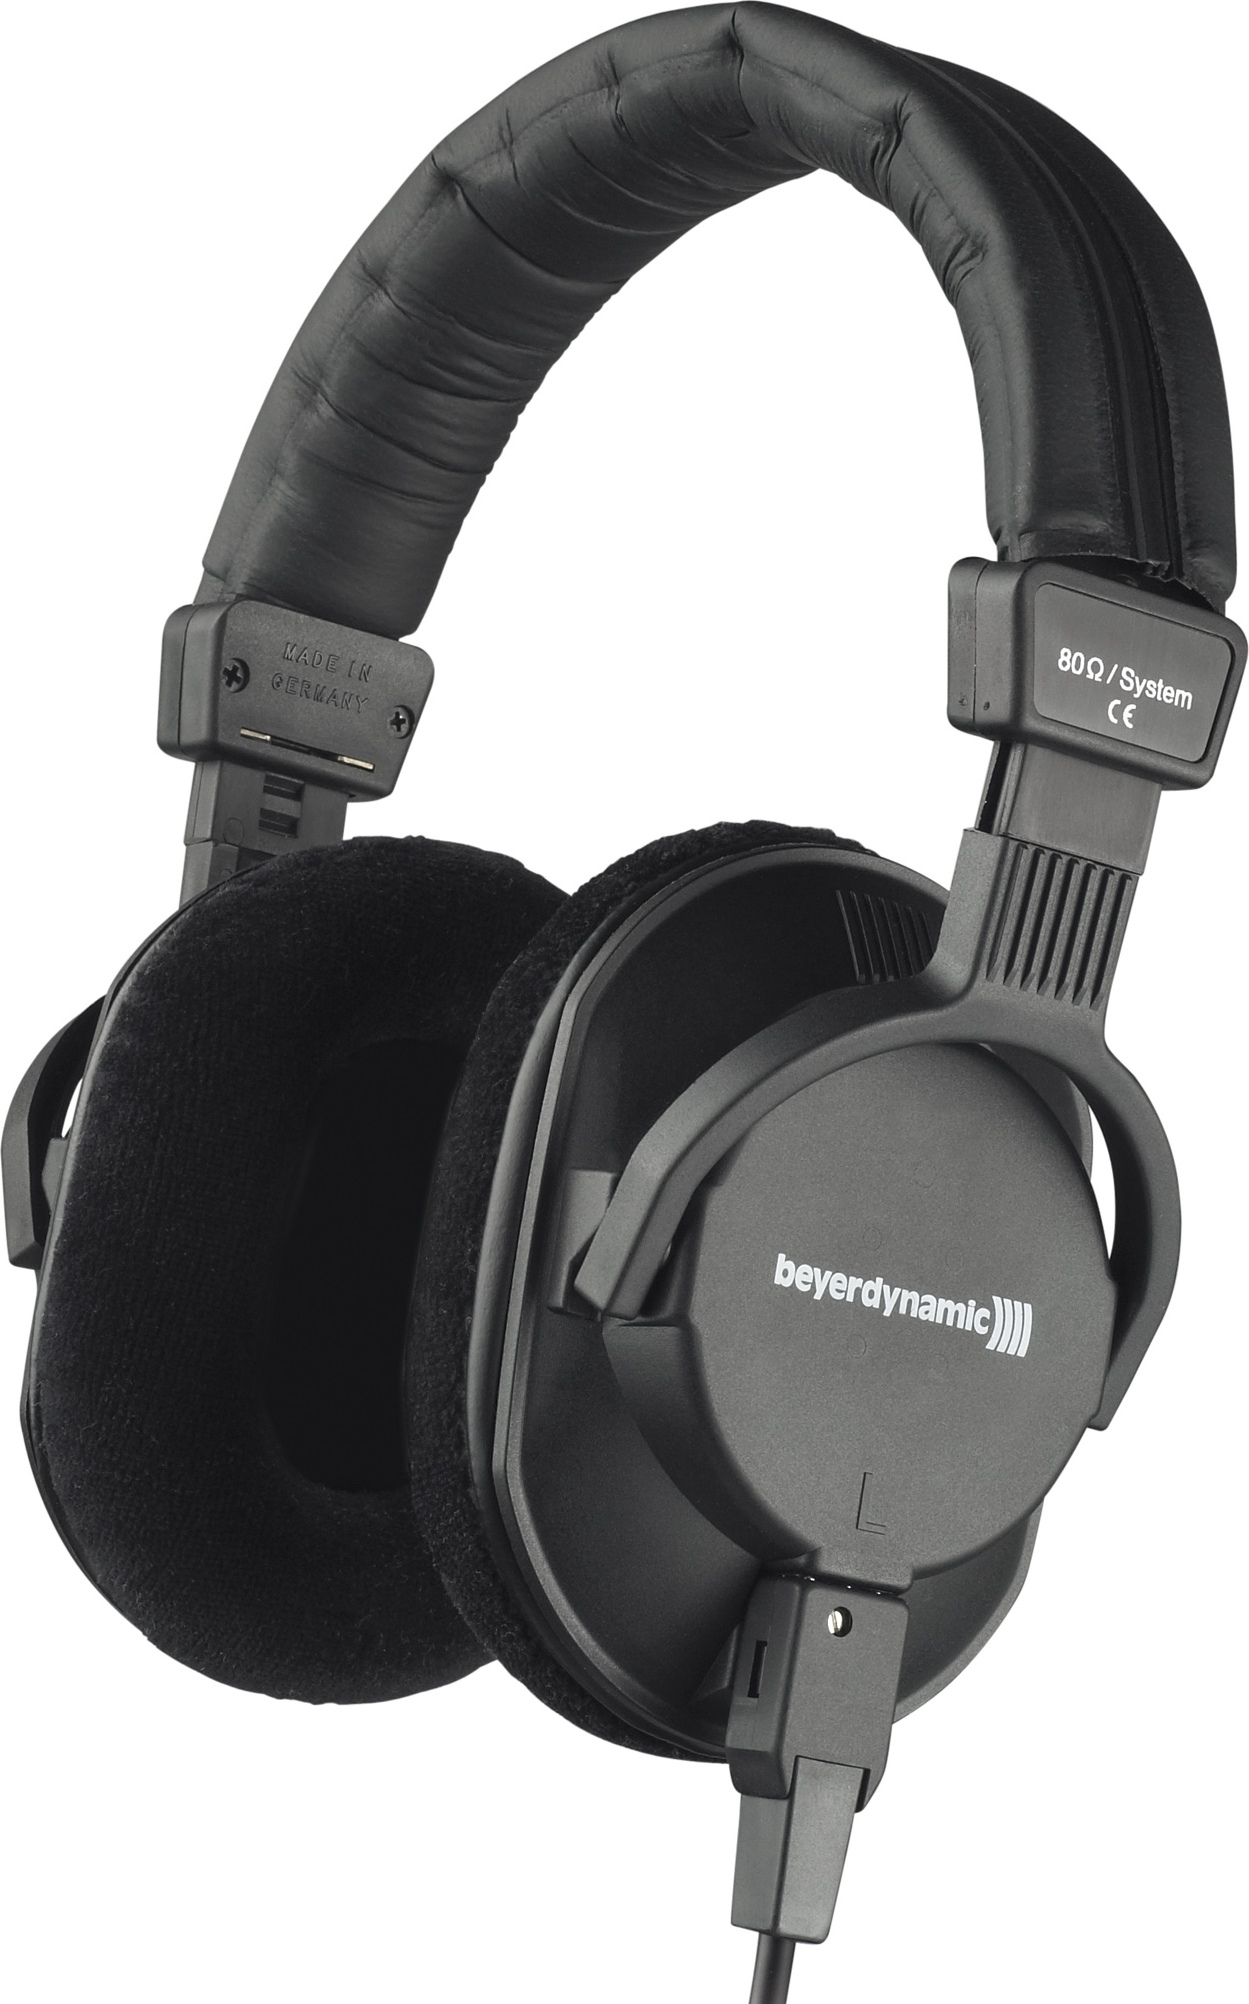 Beyerdynamic Dt 250 80 Ohms - Closed headset - Main picture